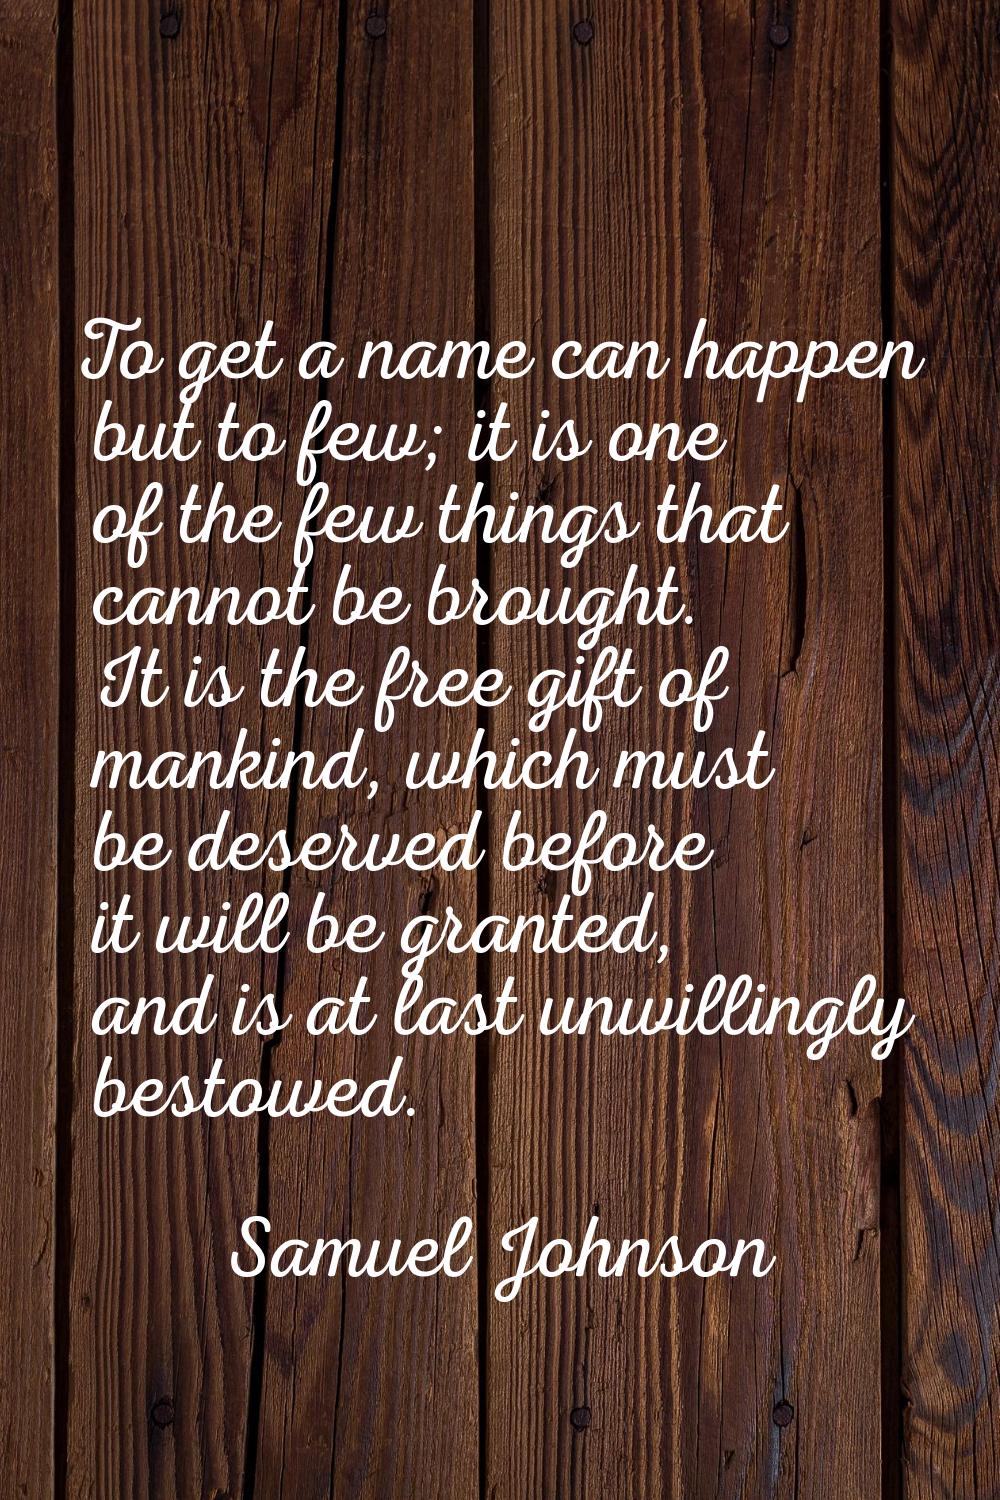 To get a name can happen but to few; it is one of the few things that cannot be brought. It is the 